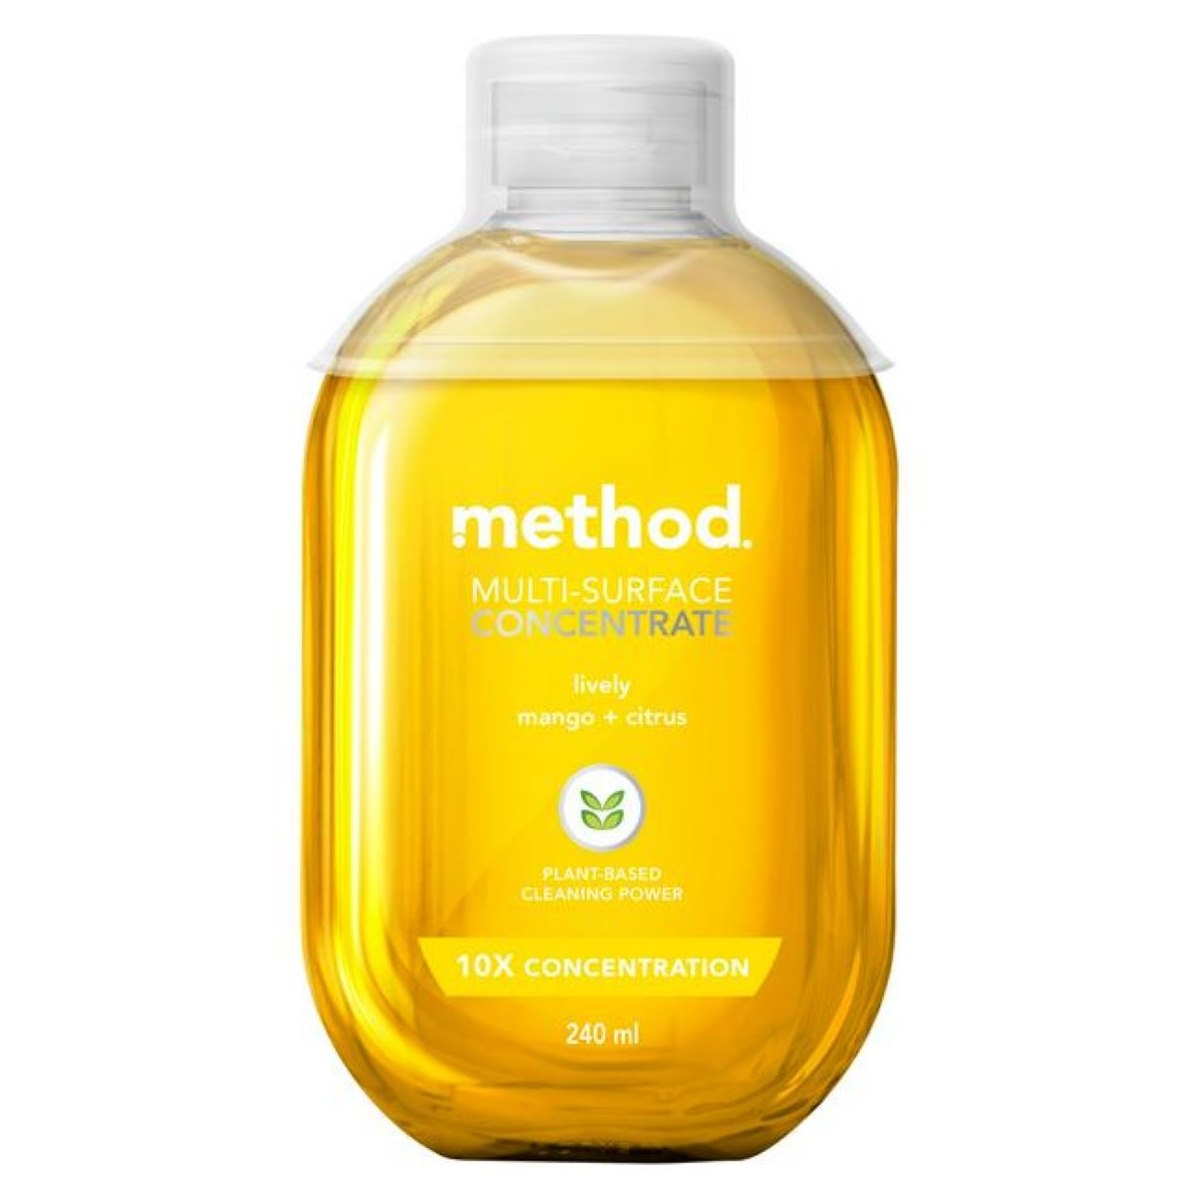 Method Multi Surface Cleaner Concentrate 240ml Lively Mango + Citrus